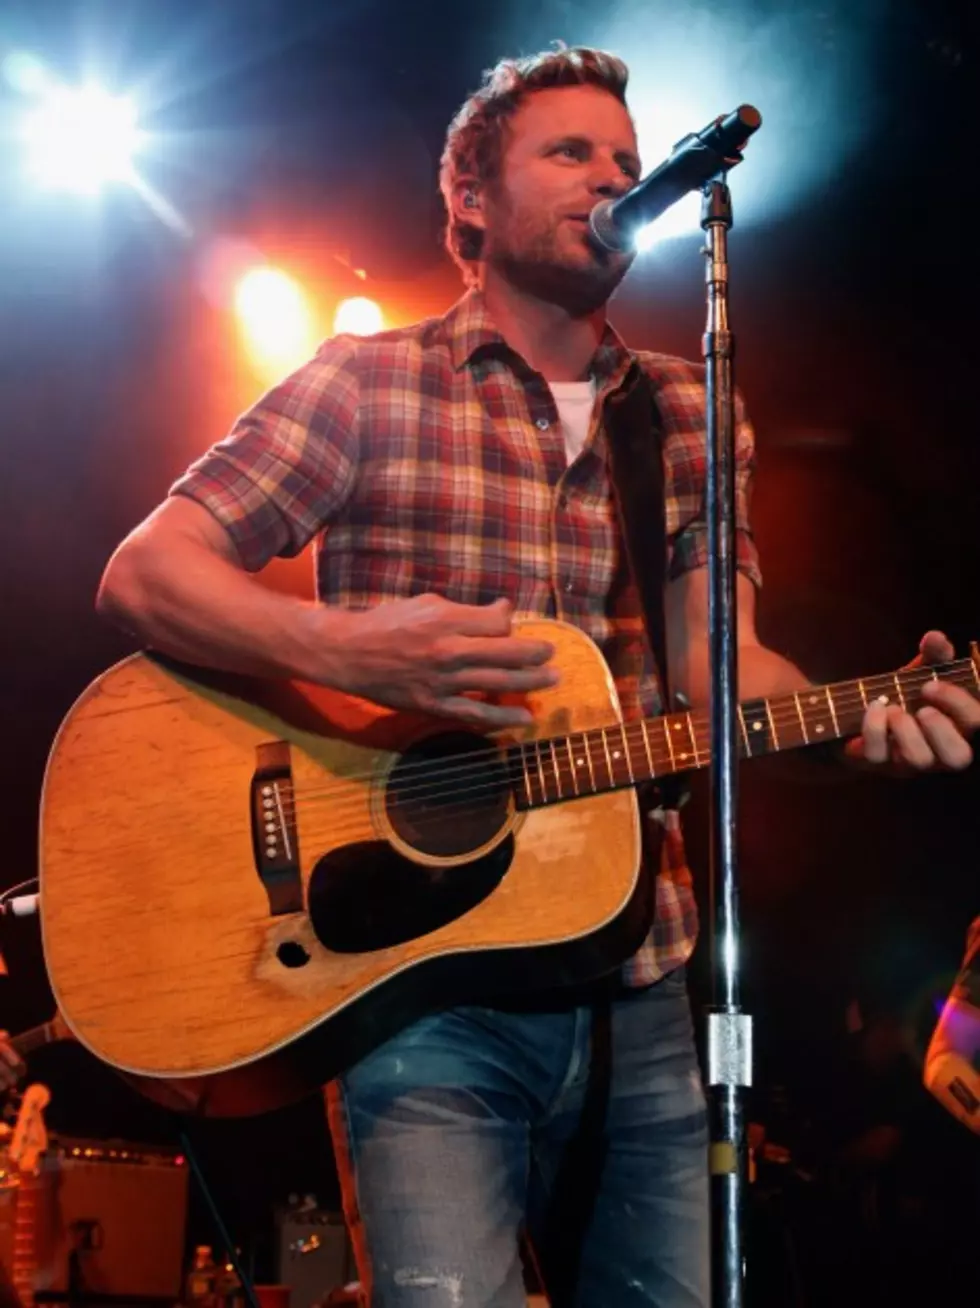 Dierks Bentley&#8217;s &#8216;Say You Do&#8217; From &#8216;Riser&#8217; Documentary [VIDEO]